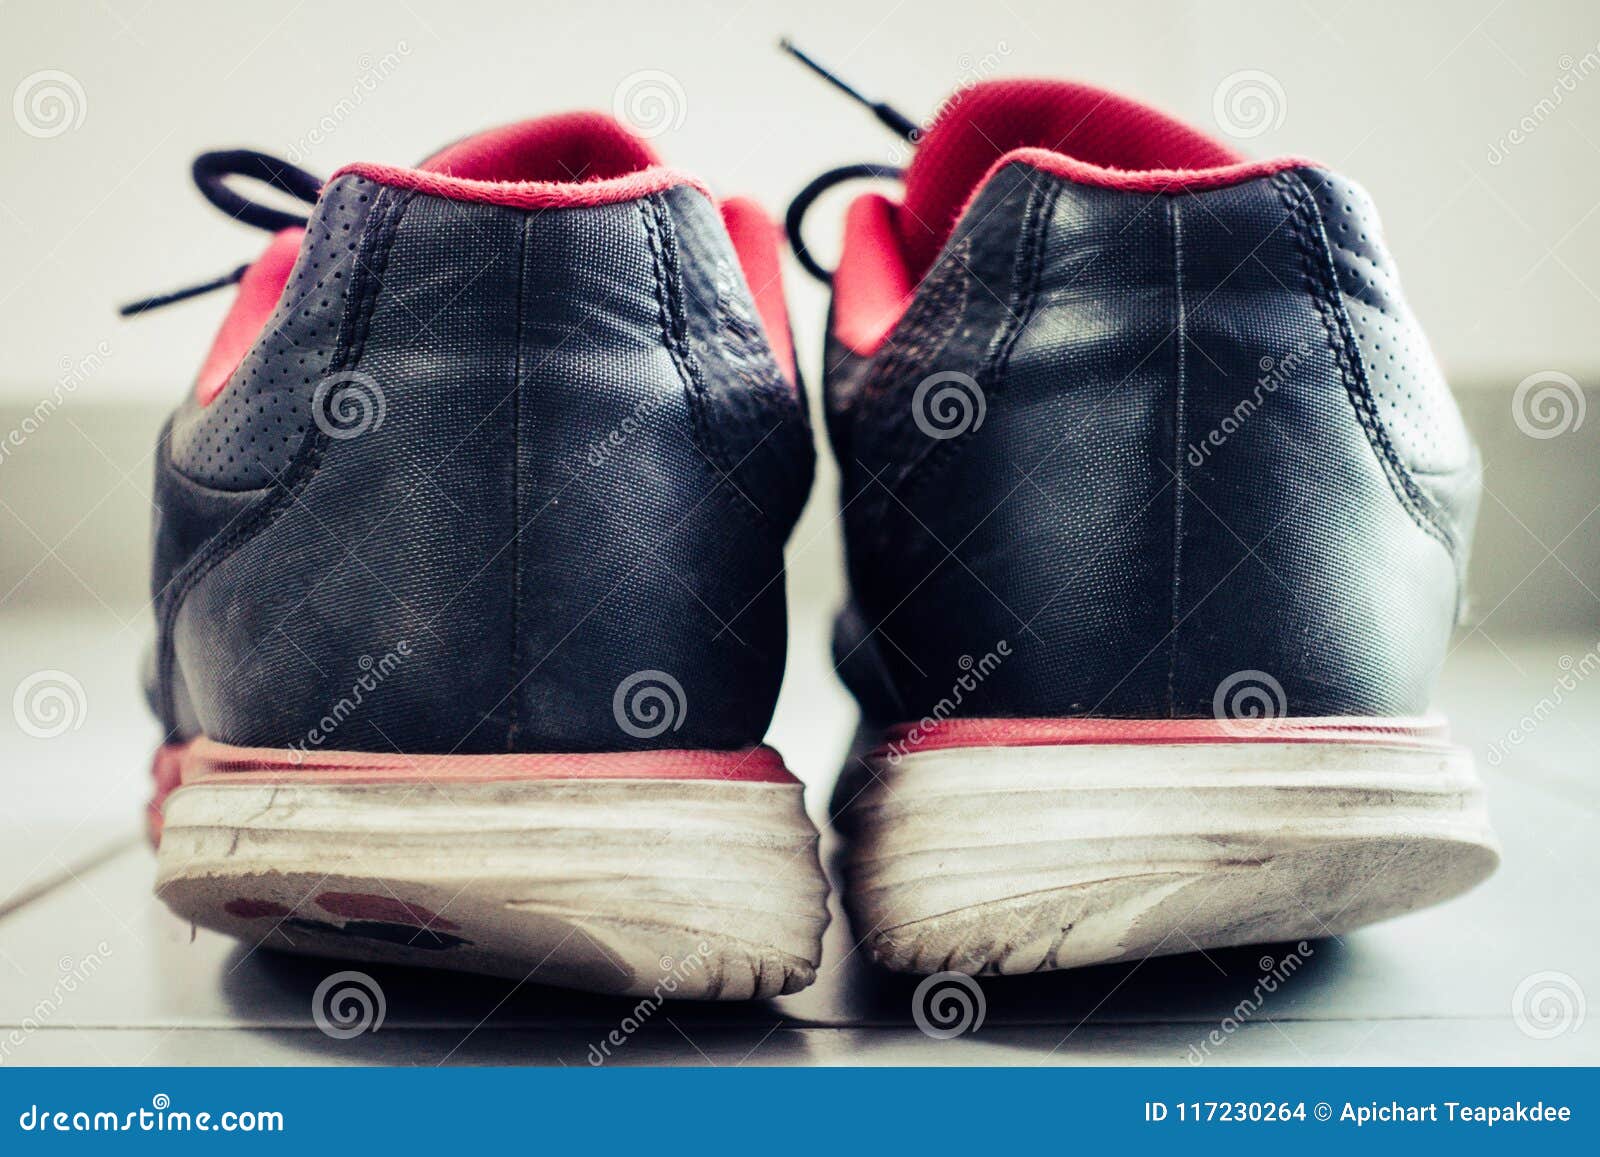 Older running shoes stock photo. Image of activity, wear - 117230264